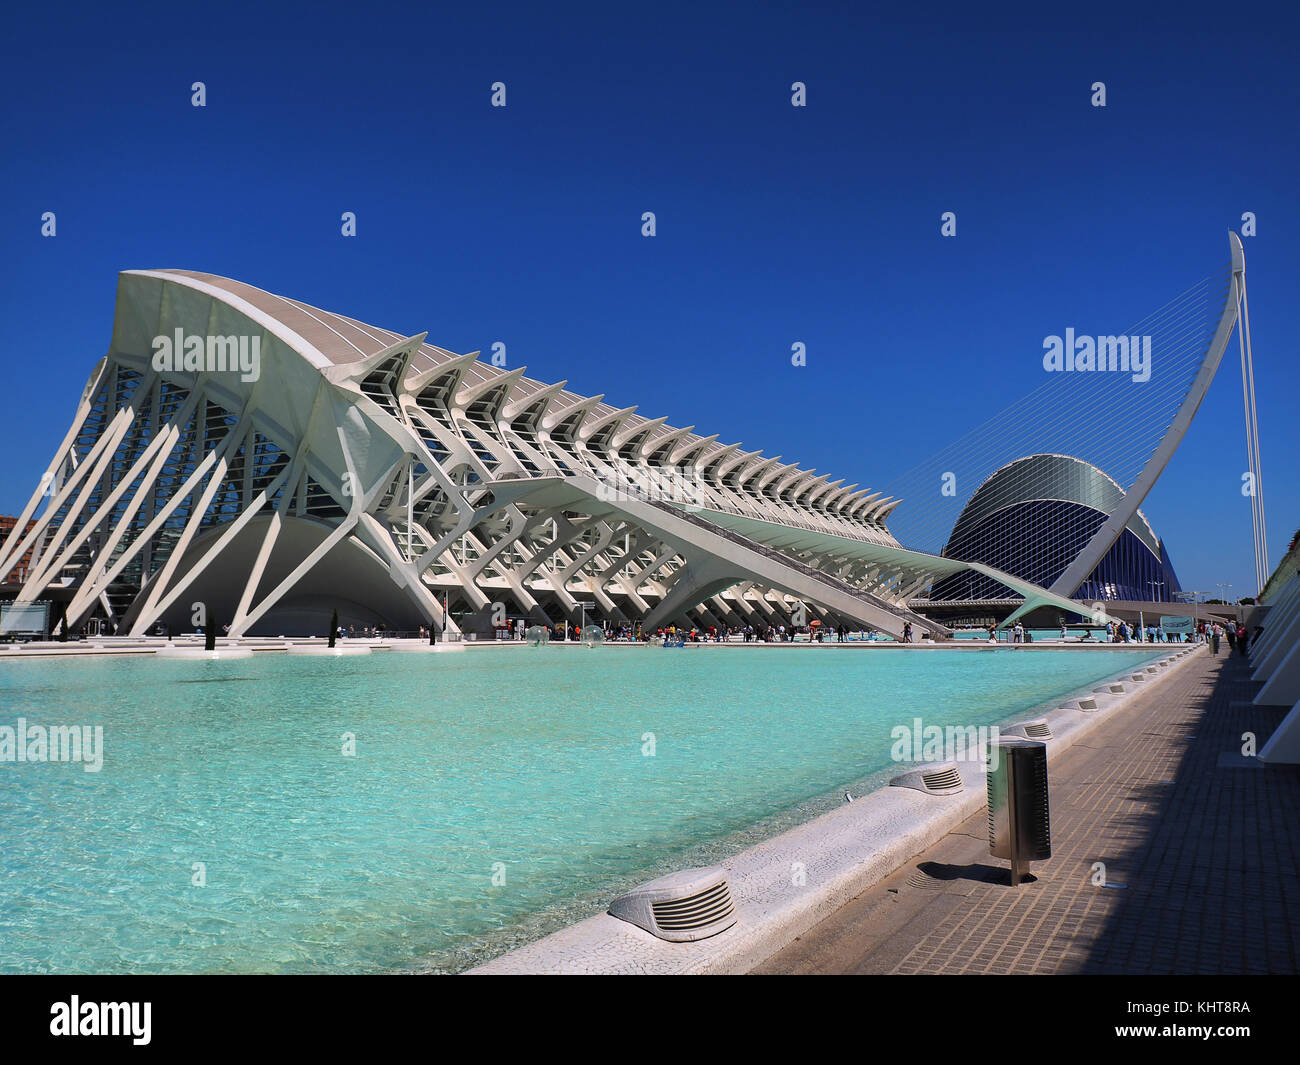 VALENCIA, SPAIN - JUL 14: City architectural detail on JUL 14, 2017 in Valencia, Spain. Valencia welcomes more than 4 million visitors every year. Stock Photo